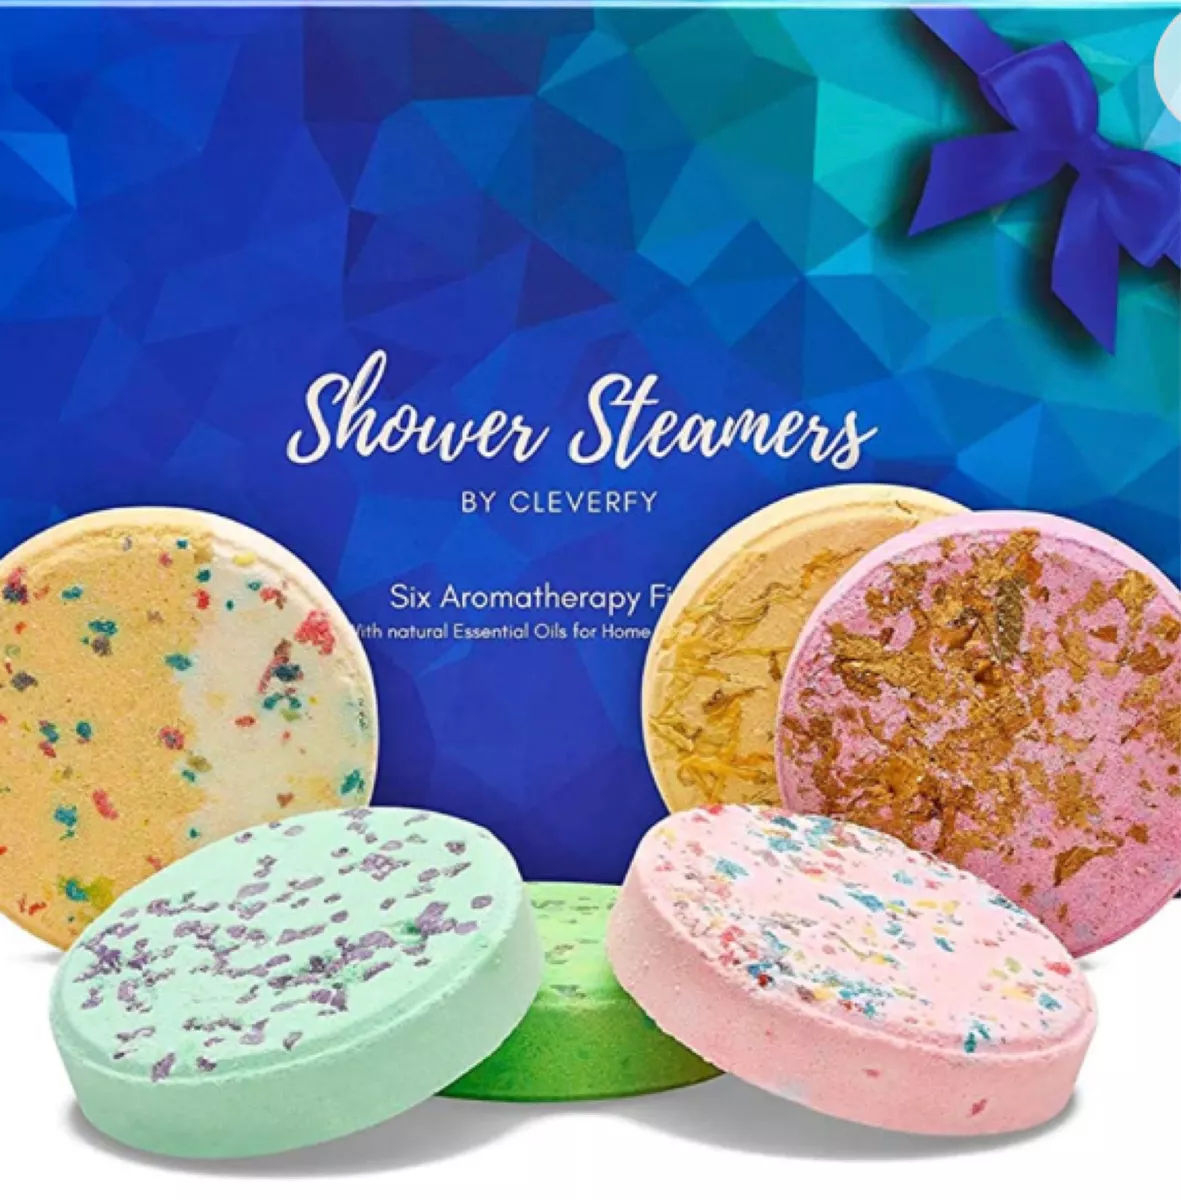  Aromatherapy Shower Steamers Gifts for Mothers Day